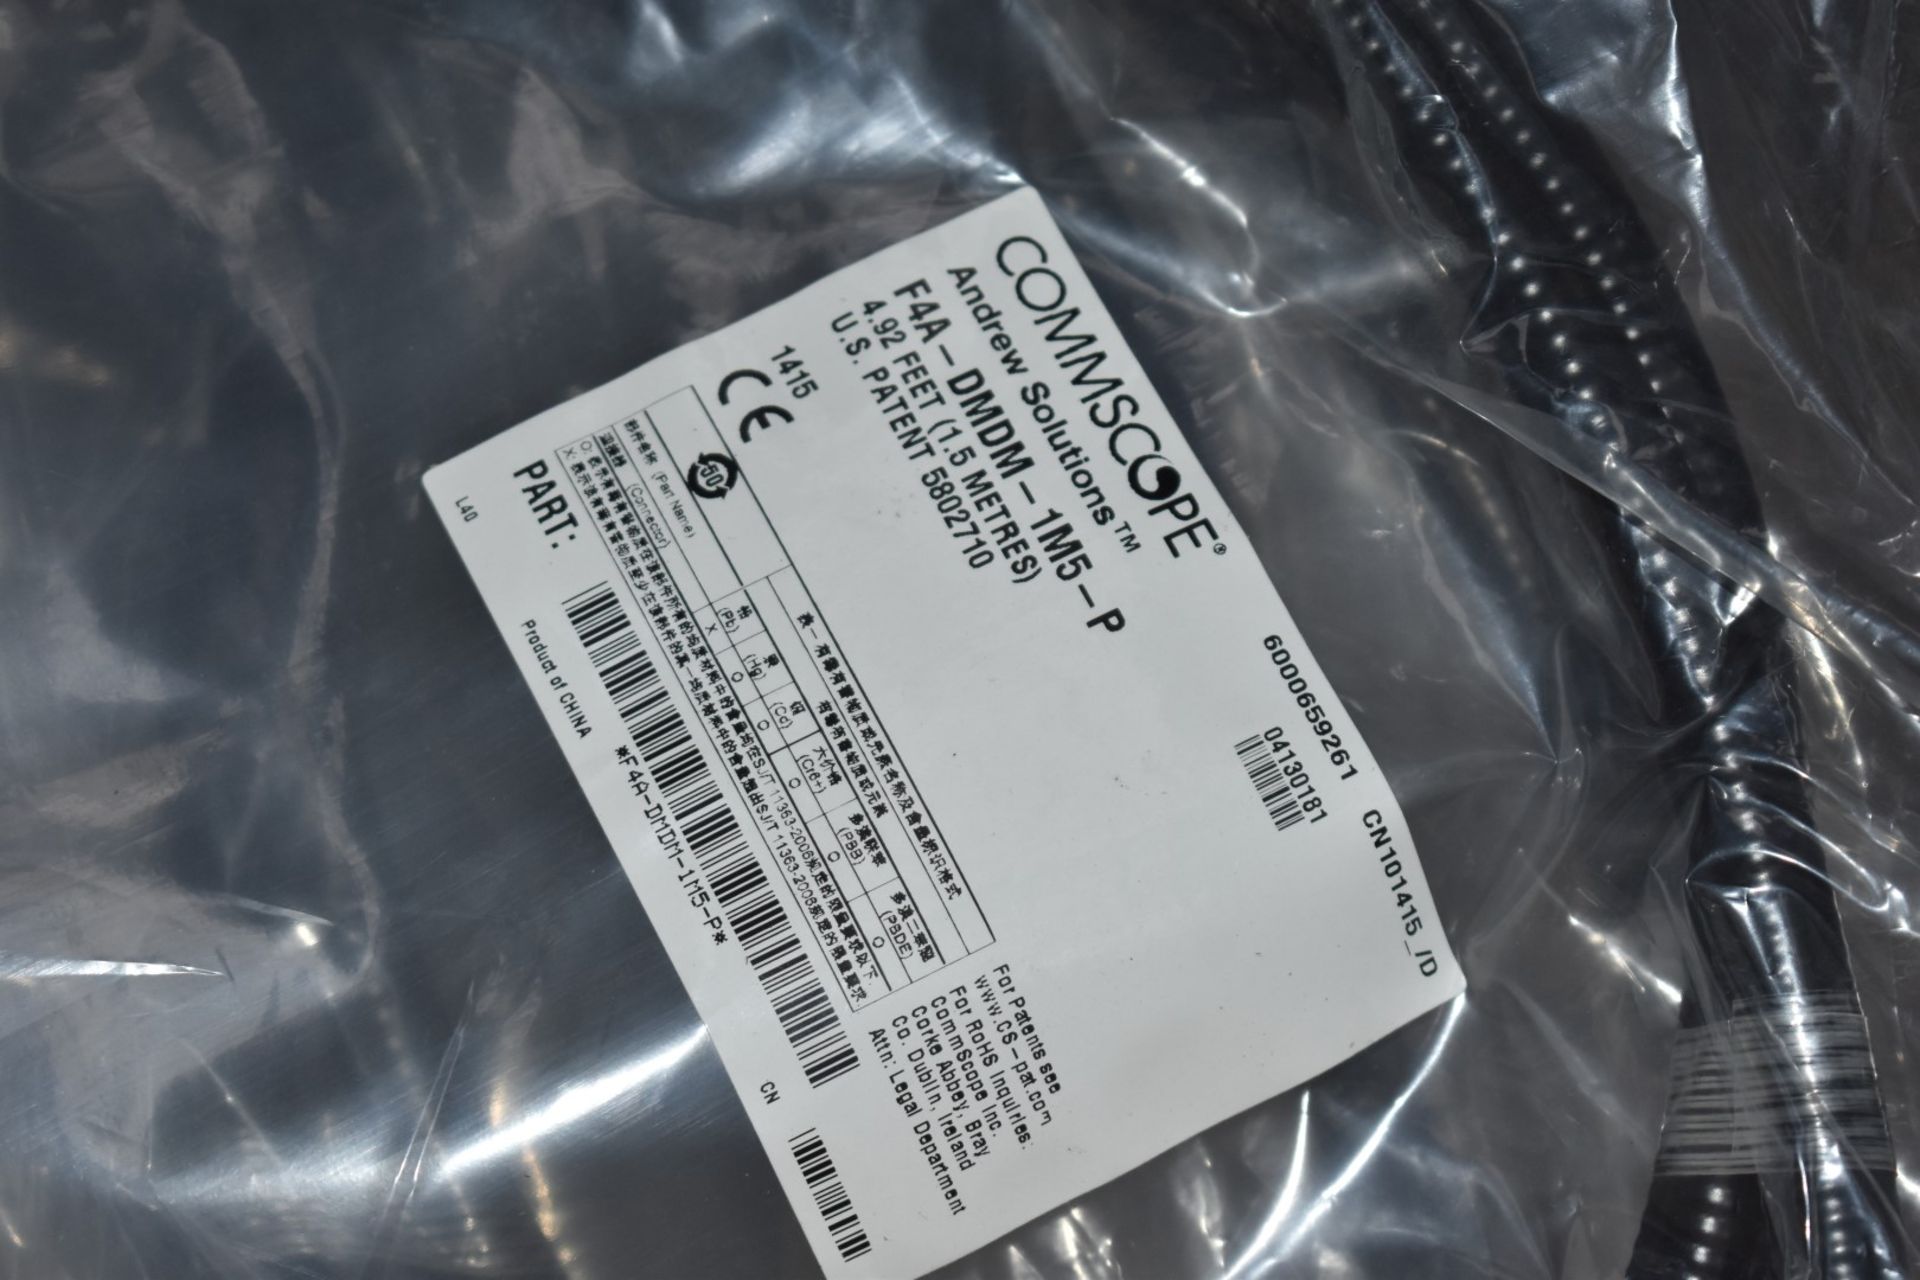 22 x Commscope Heliax Superflexible SureFlex Jumper Cables With Interfaces - Brand New - Type F4A- - Image 5 of 5